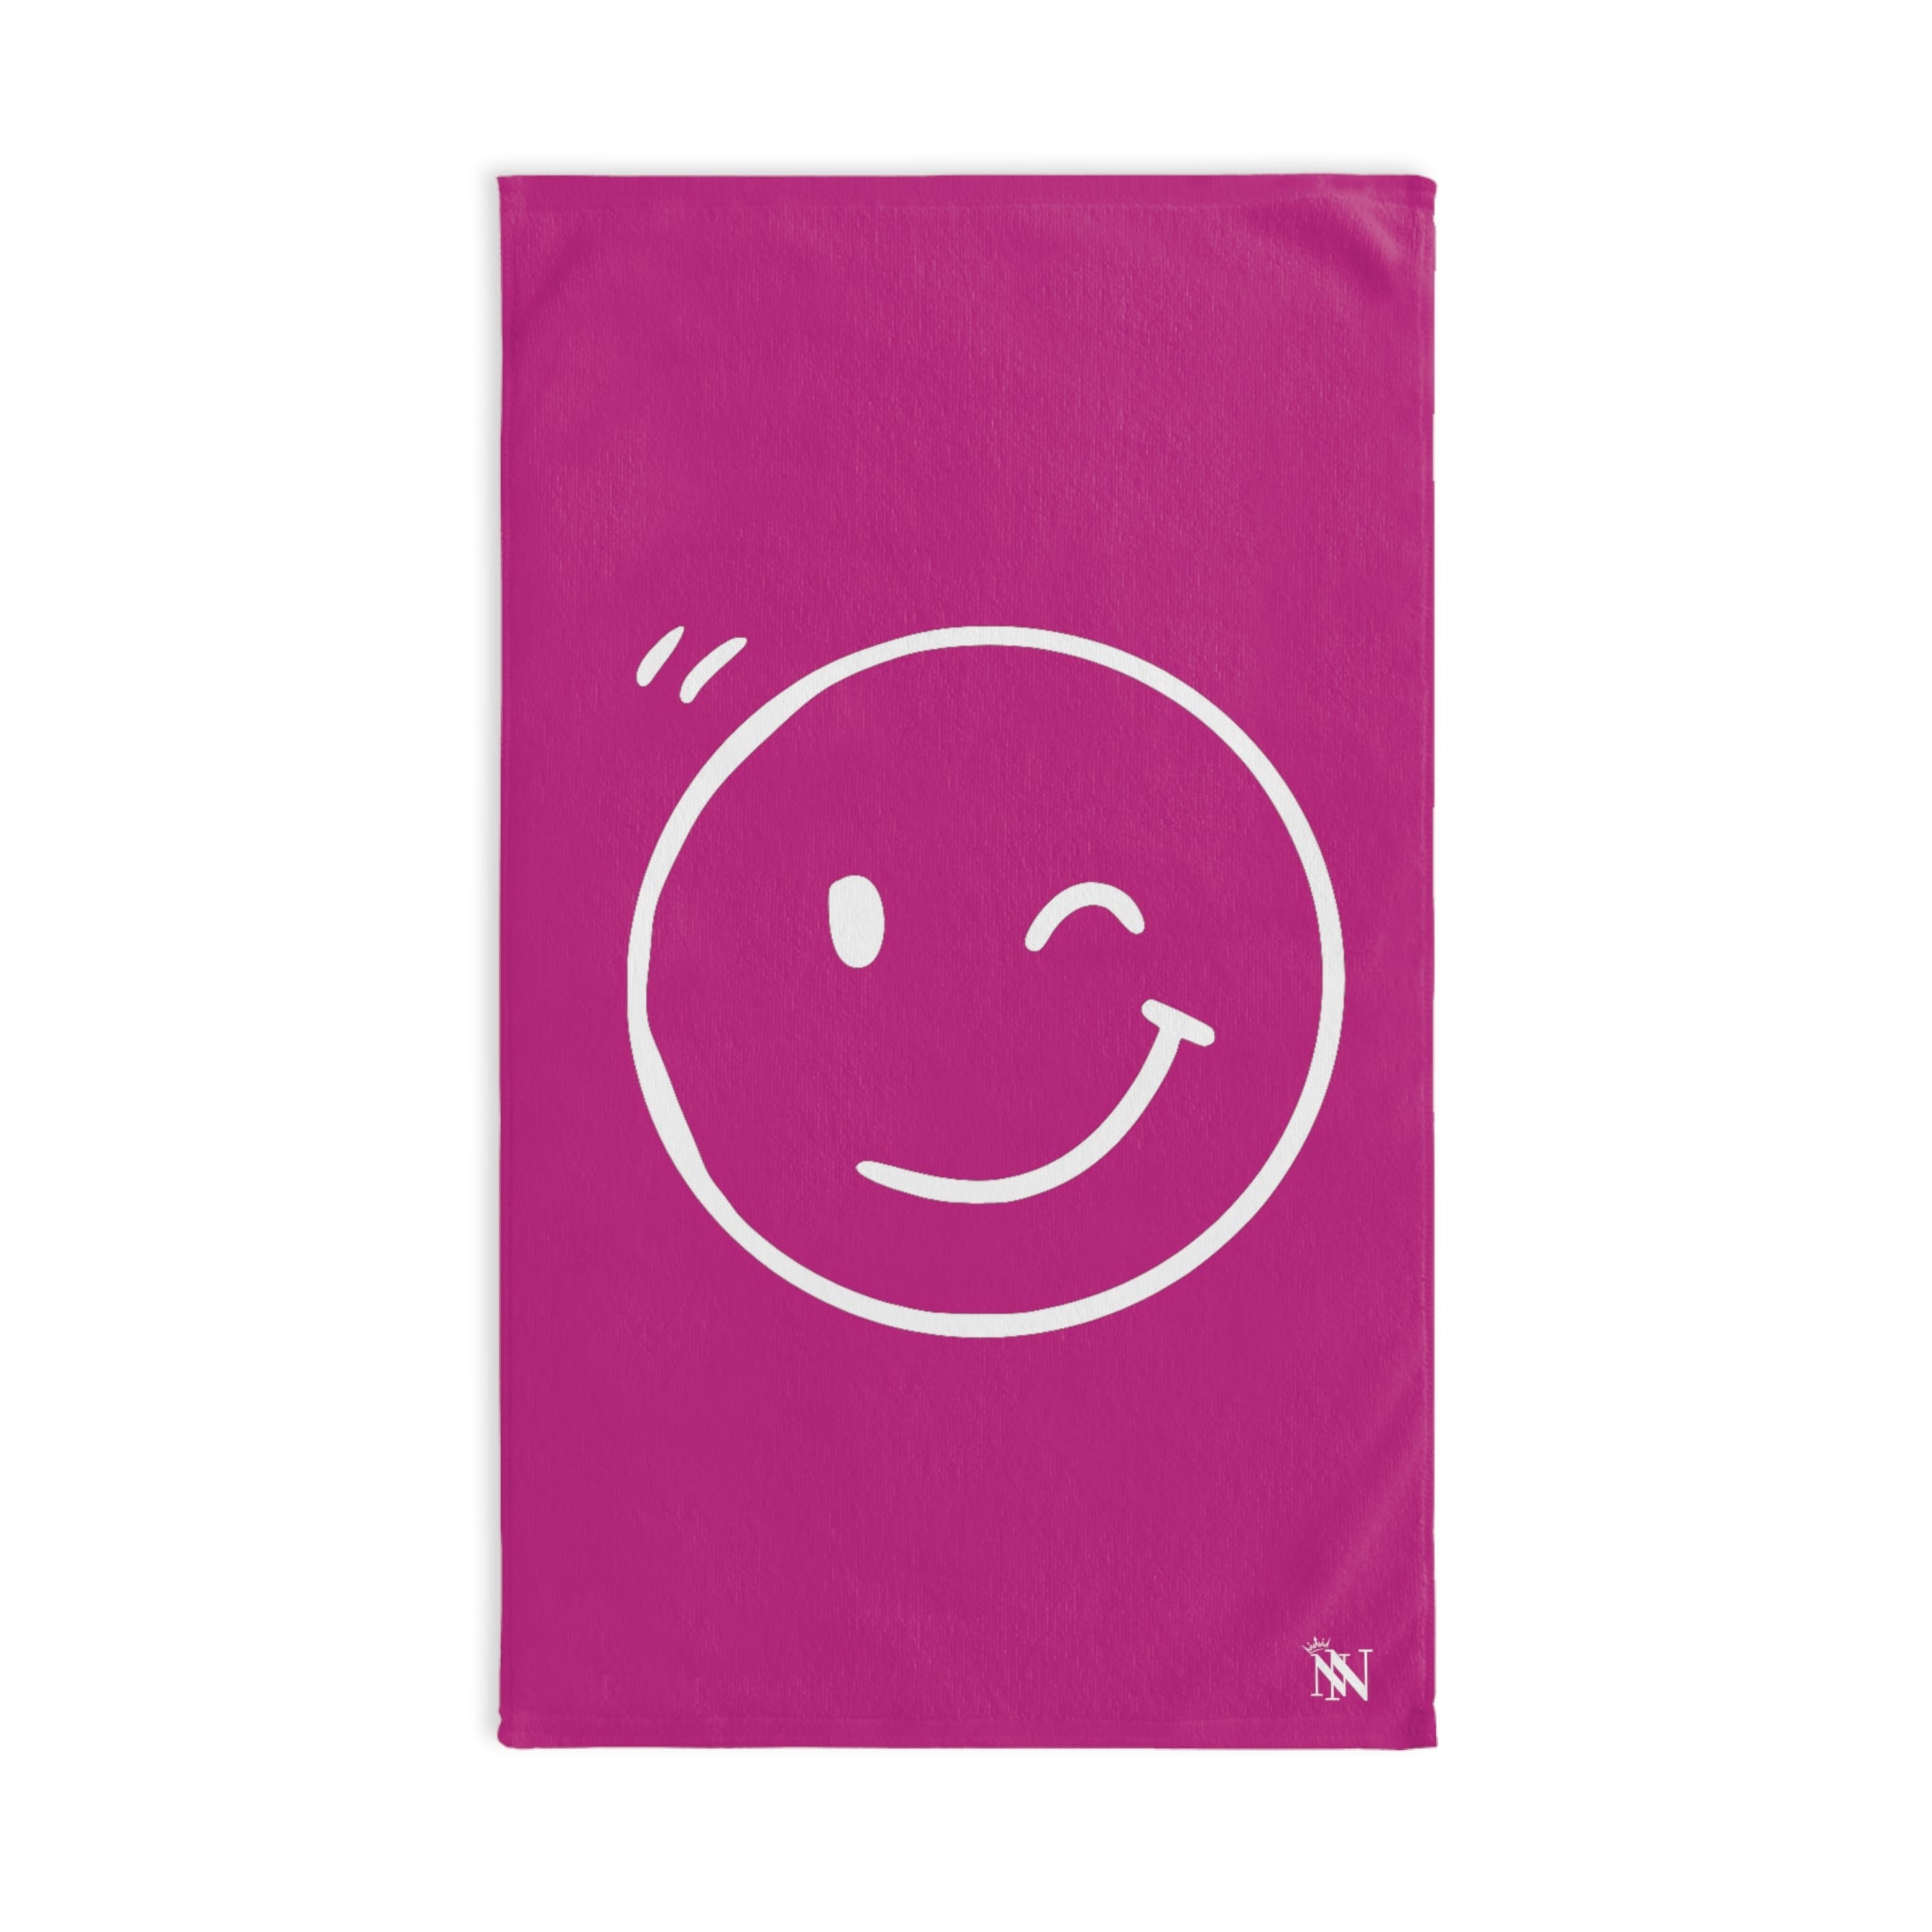 Emoji  Wink  Fuscia | Funny Gifts for Men - Gifts for Him - Birthday Gifts for Men, Him, Husband, Boyfriend, New Couple Gifts, Fathers & Valentines Day Gifts, Hand Towels NECTAR NAPKINS